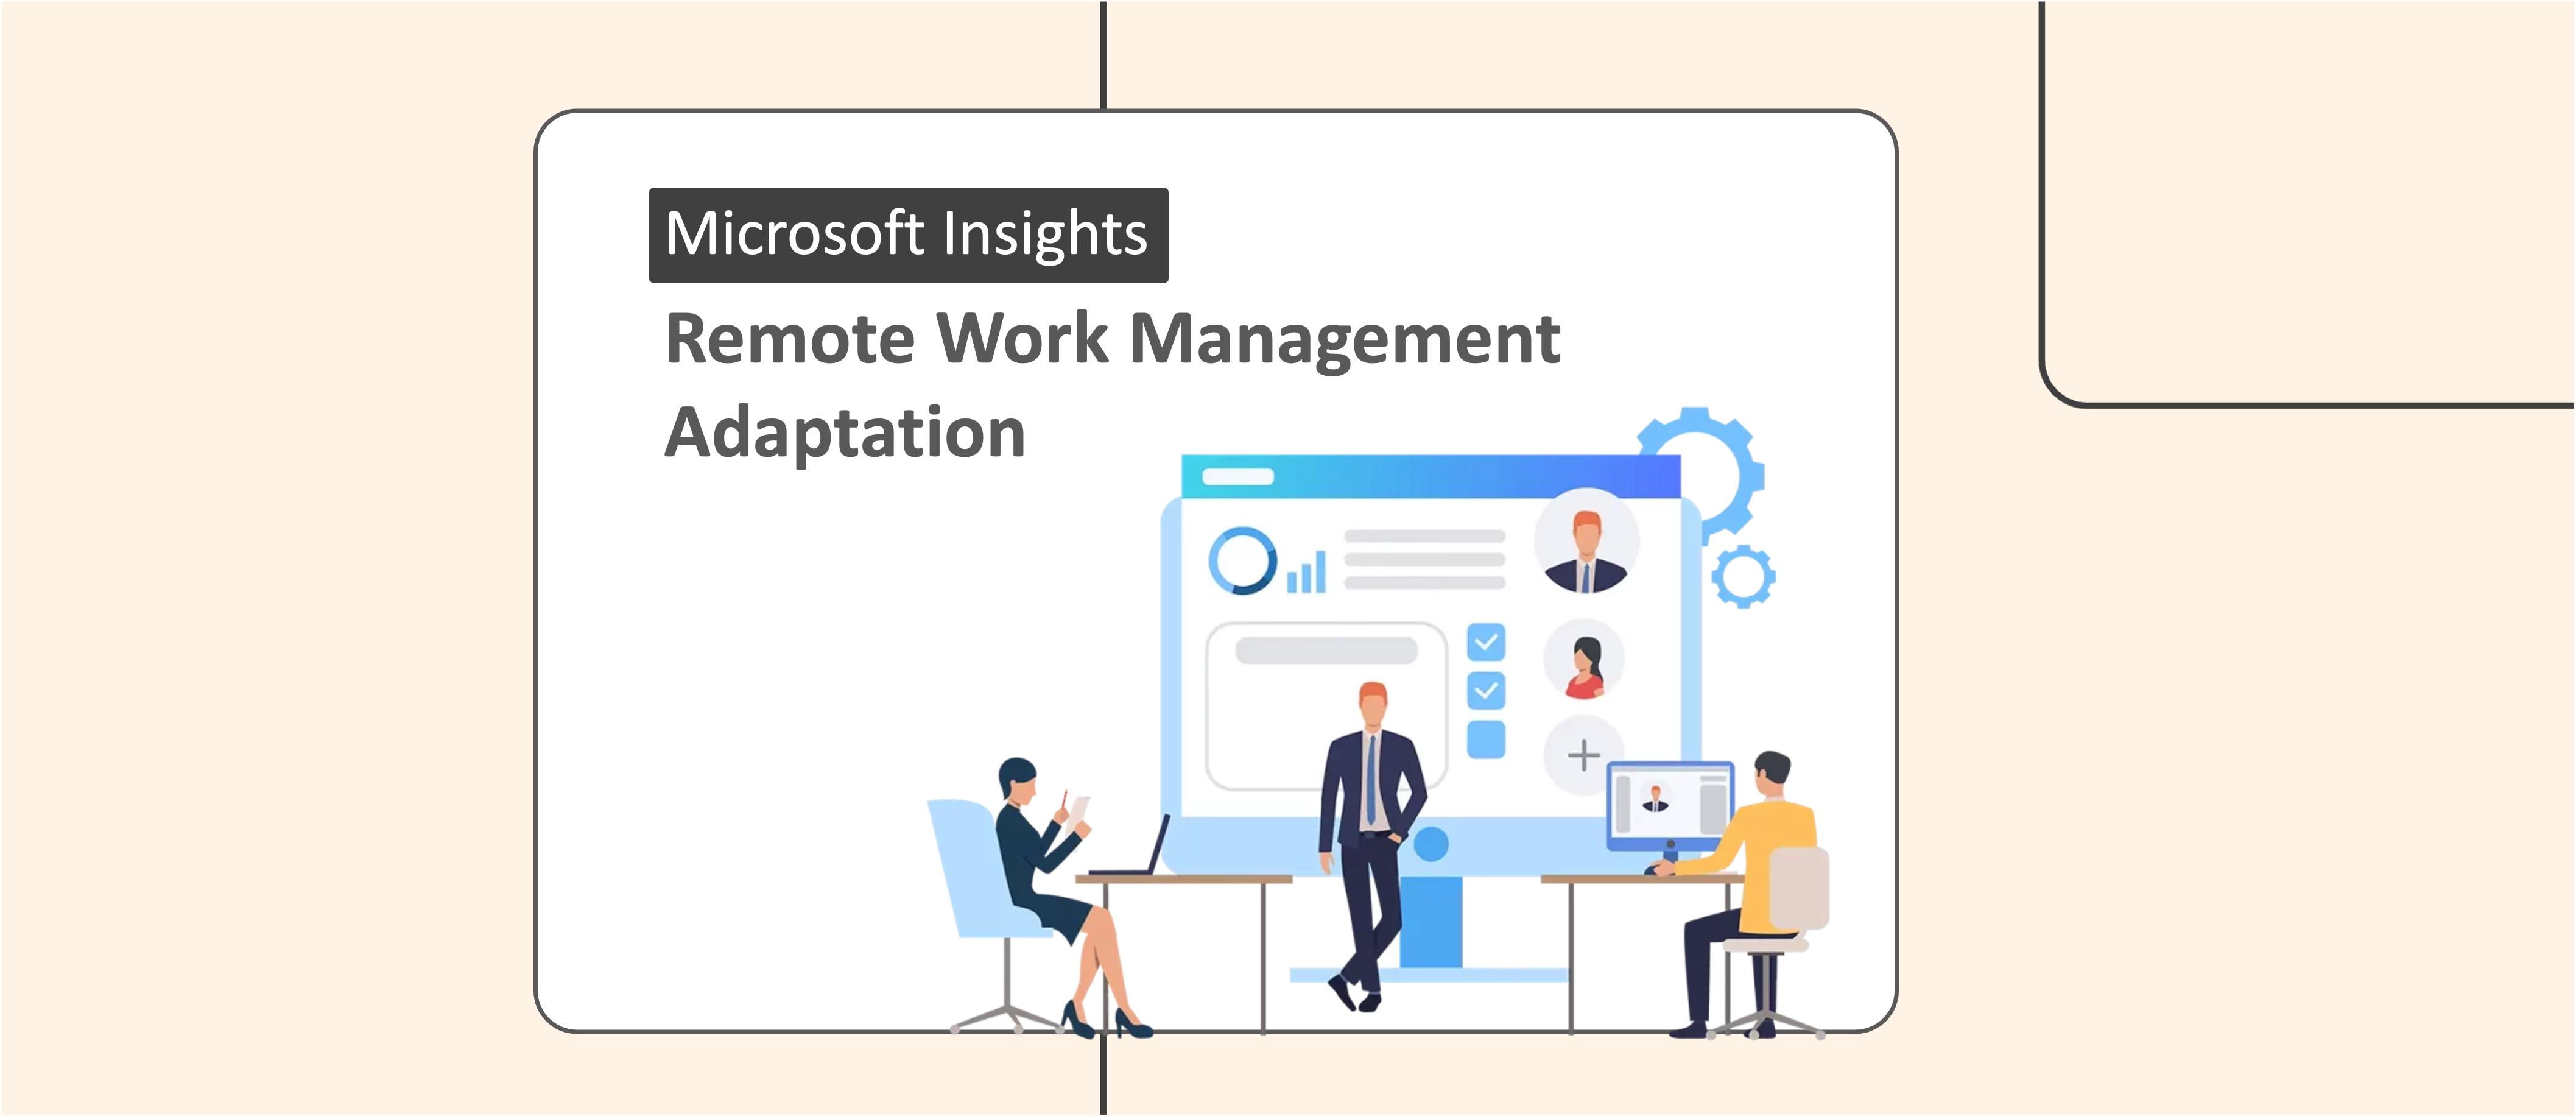 Great insights by Microsoft in How Work Management Needs to be Adapted in this World of Remote Working